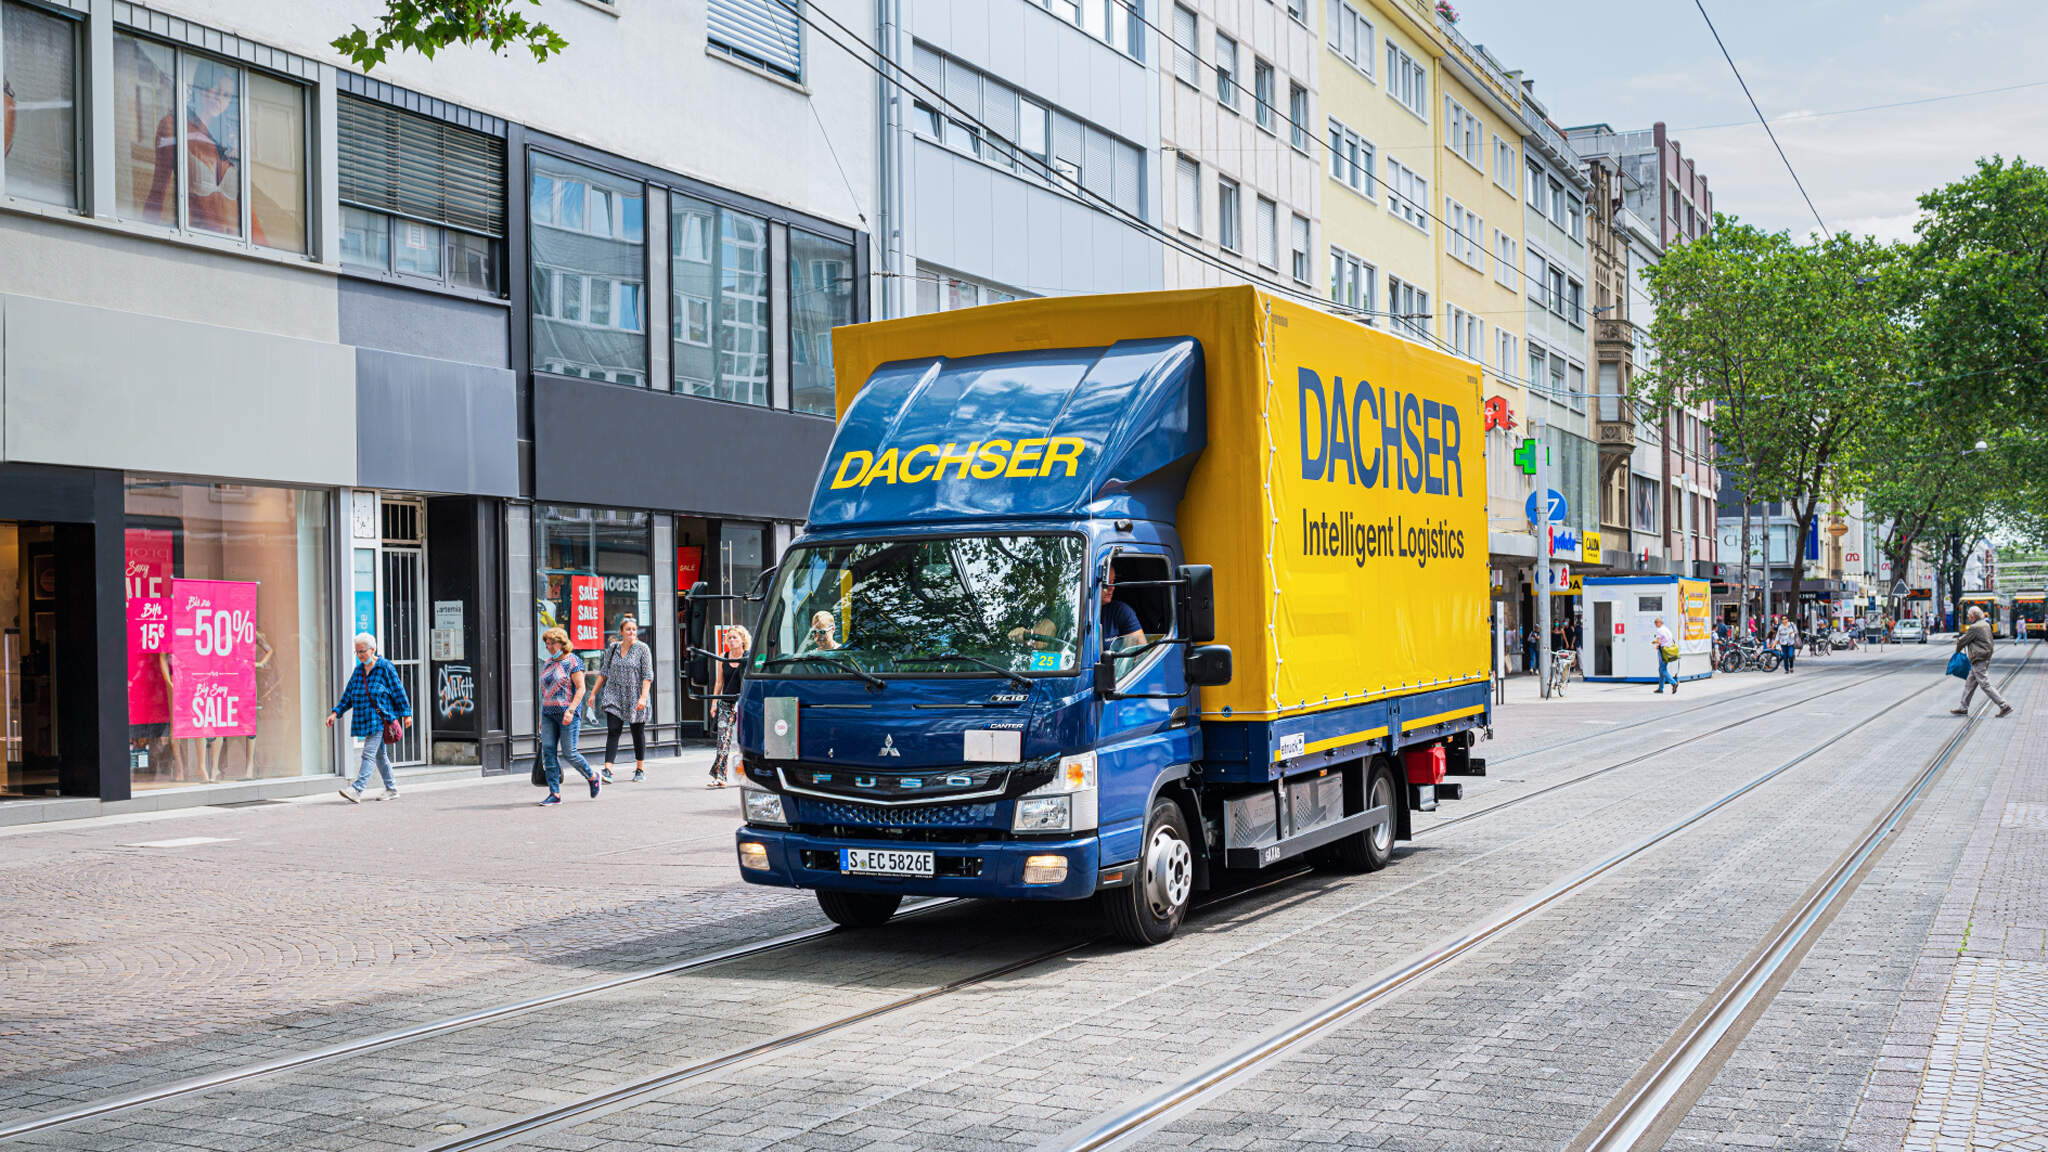 DACHSER Emission-Free Delivery is already available in twelve defined city-center delivery areas.